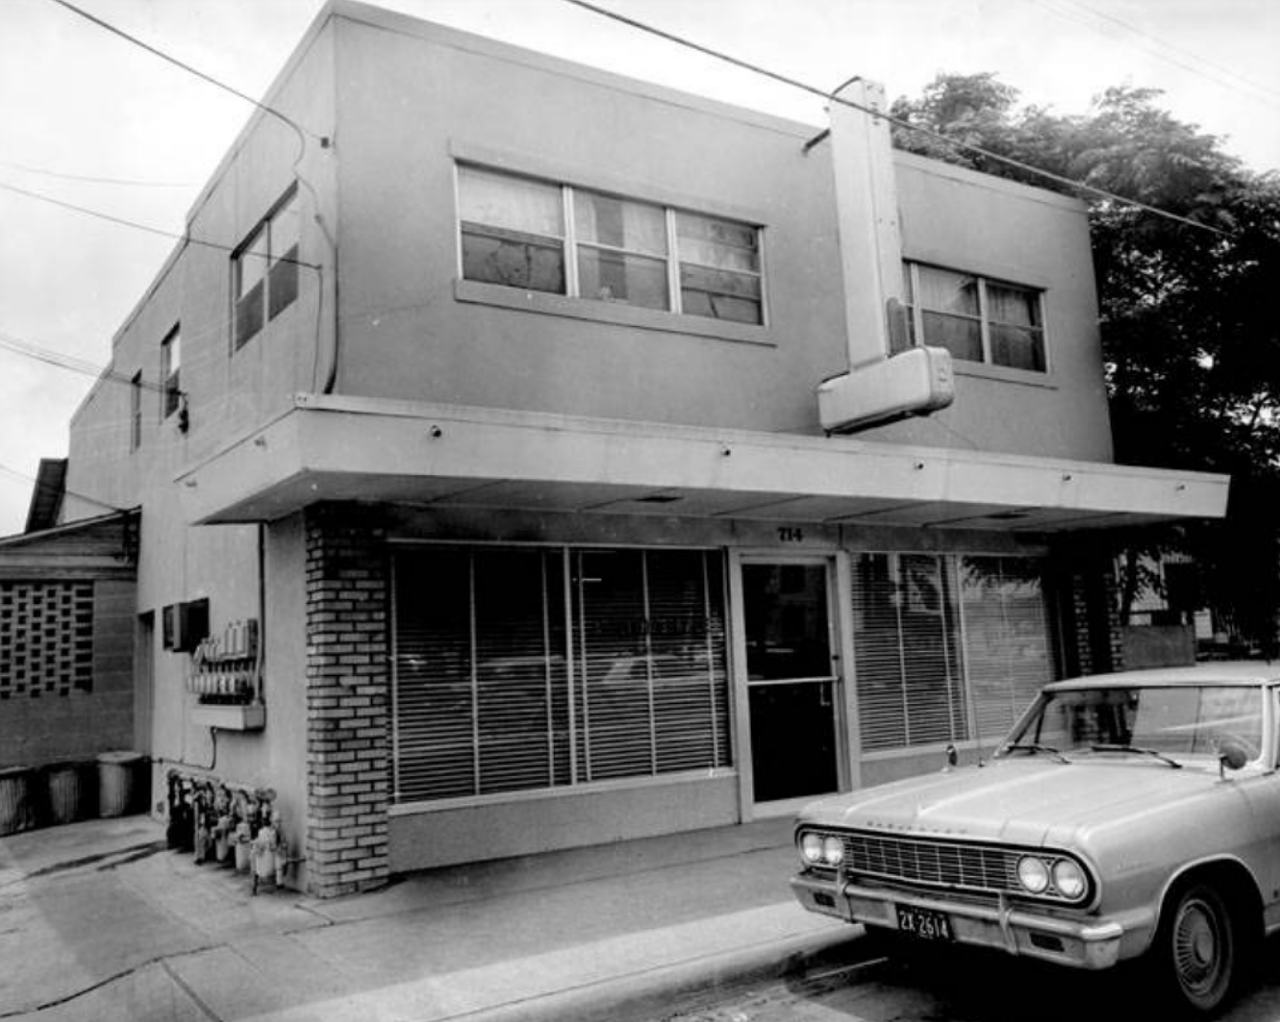 Across from Columbus Park sat A-1 Litho Service at 714 West Martin Street. It's seen here in this 1968 photo.